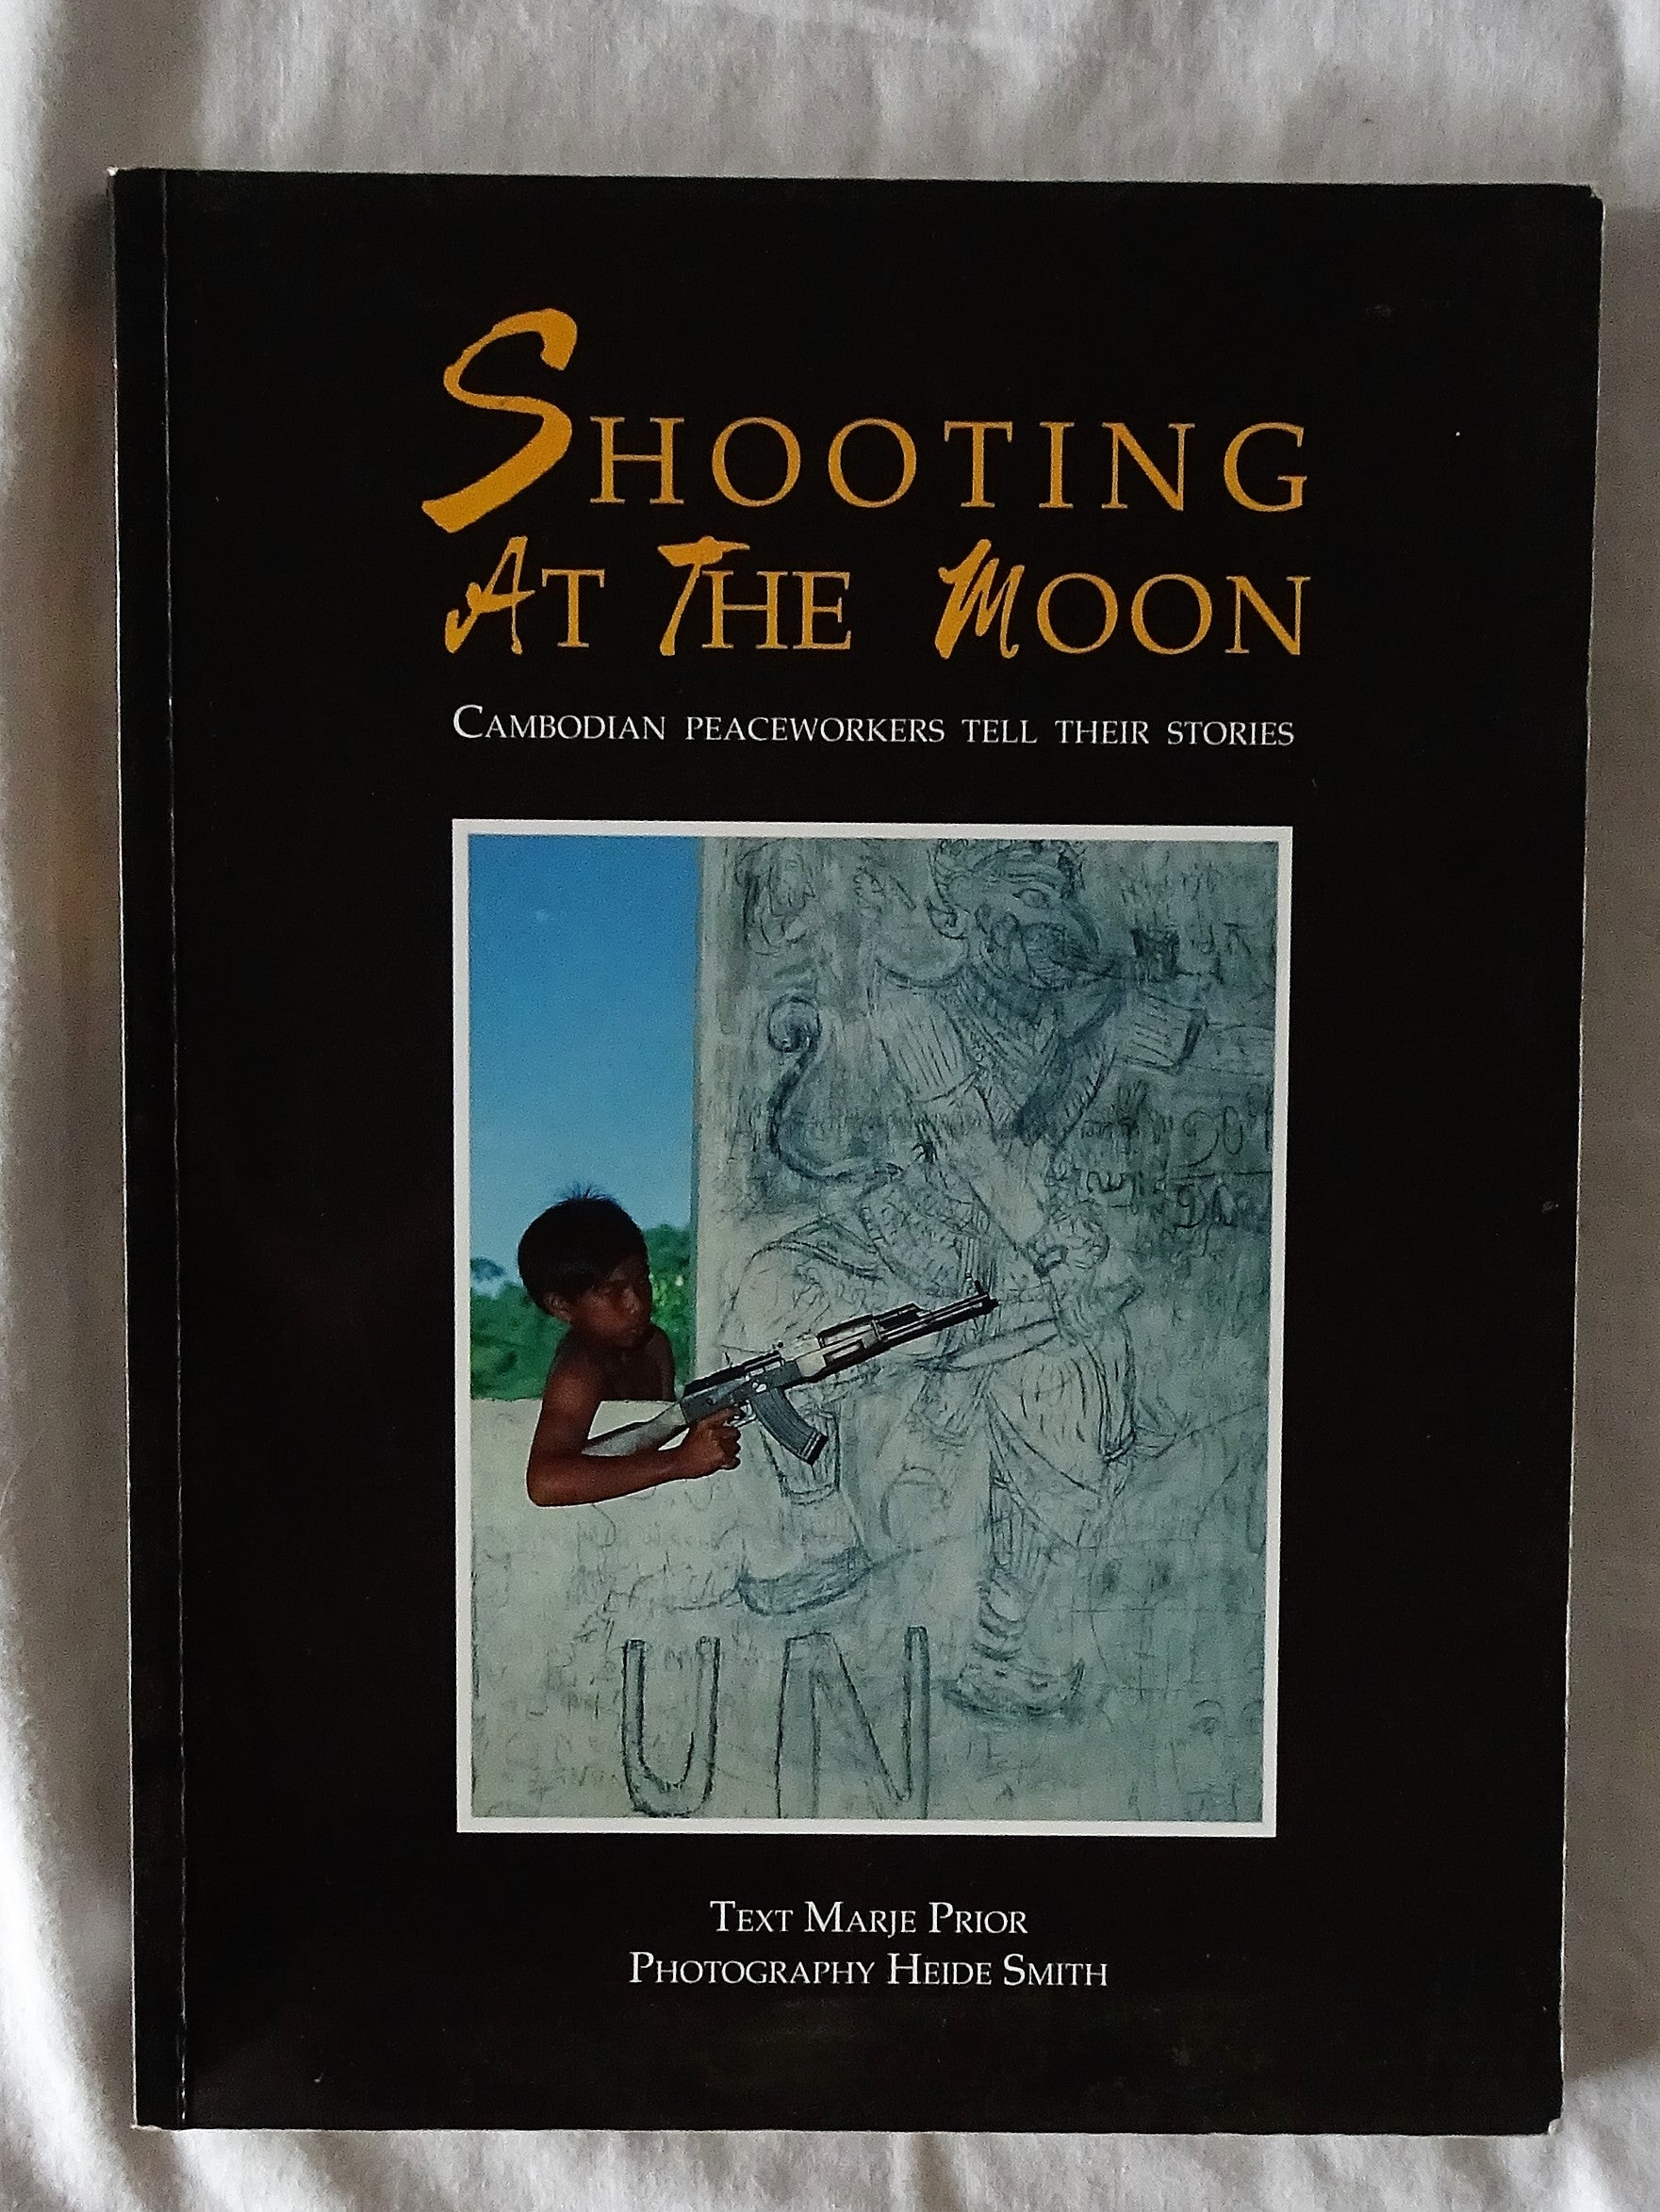 Shooting At The Moon  Cambodian Peaceworkers Tell Their Stories  Text by Marje Prior and Photography by Heide Smith